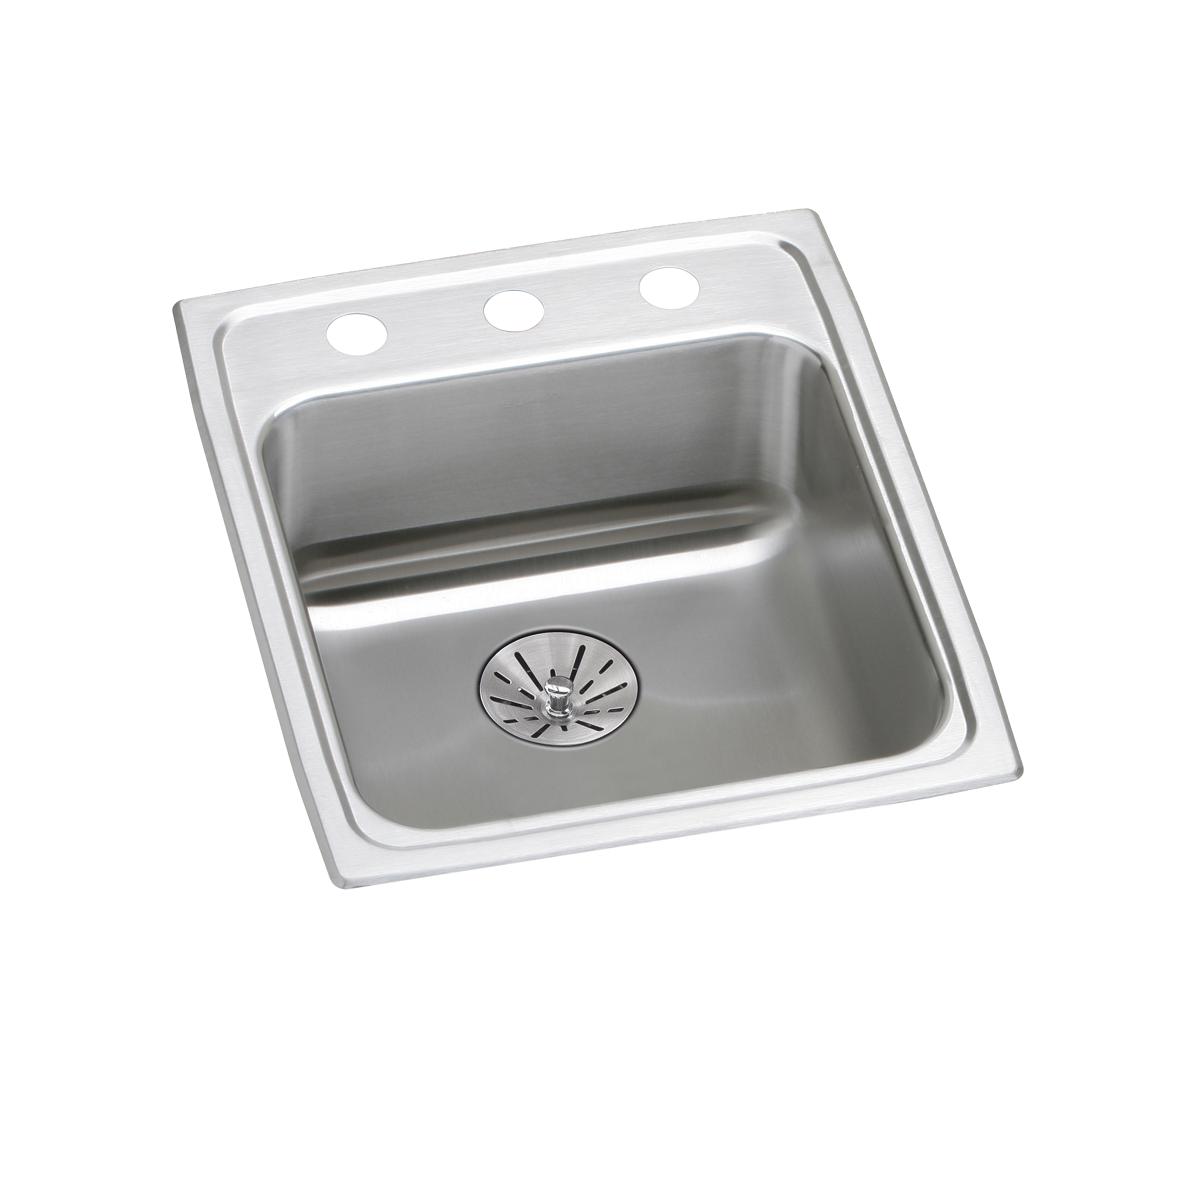 Elkay Lustertone Classic 17" x 20" x 6-1/2" OS4-Hole Single Bowl Drop-in ADA Sink with Perfect Drain